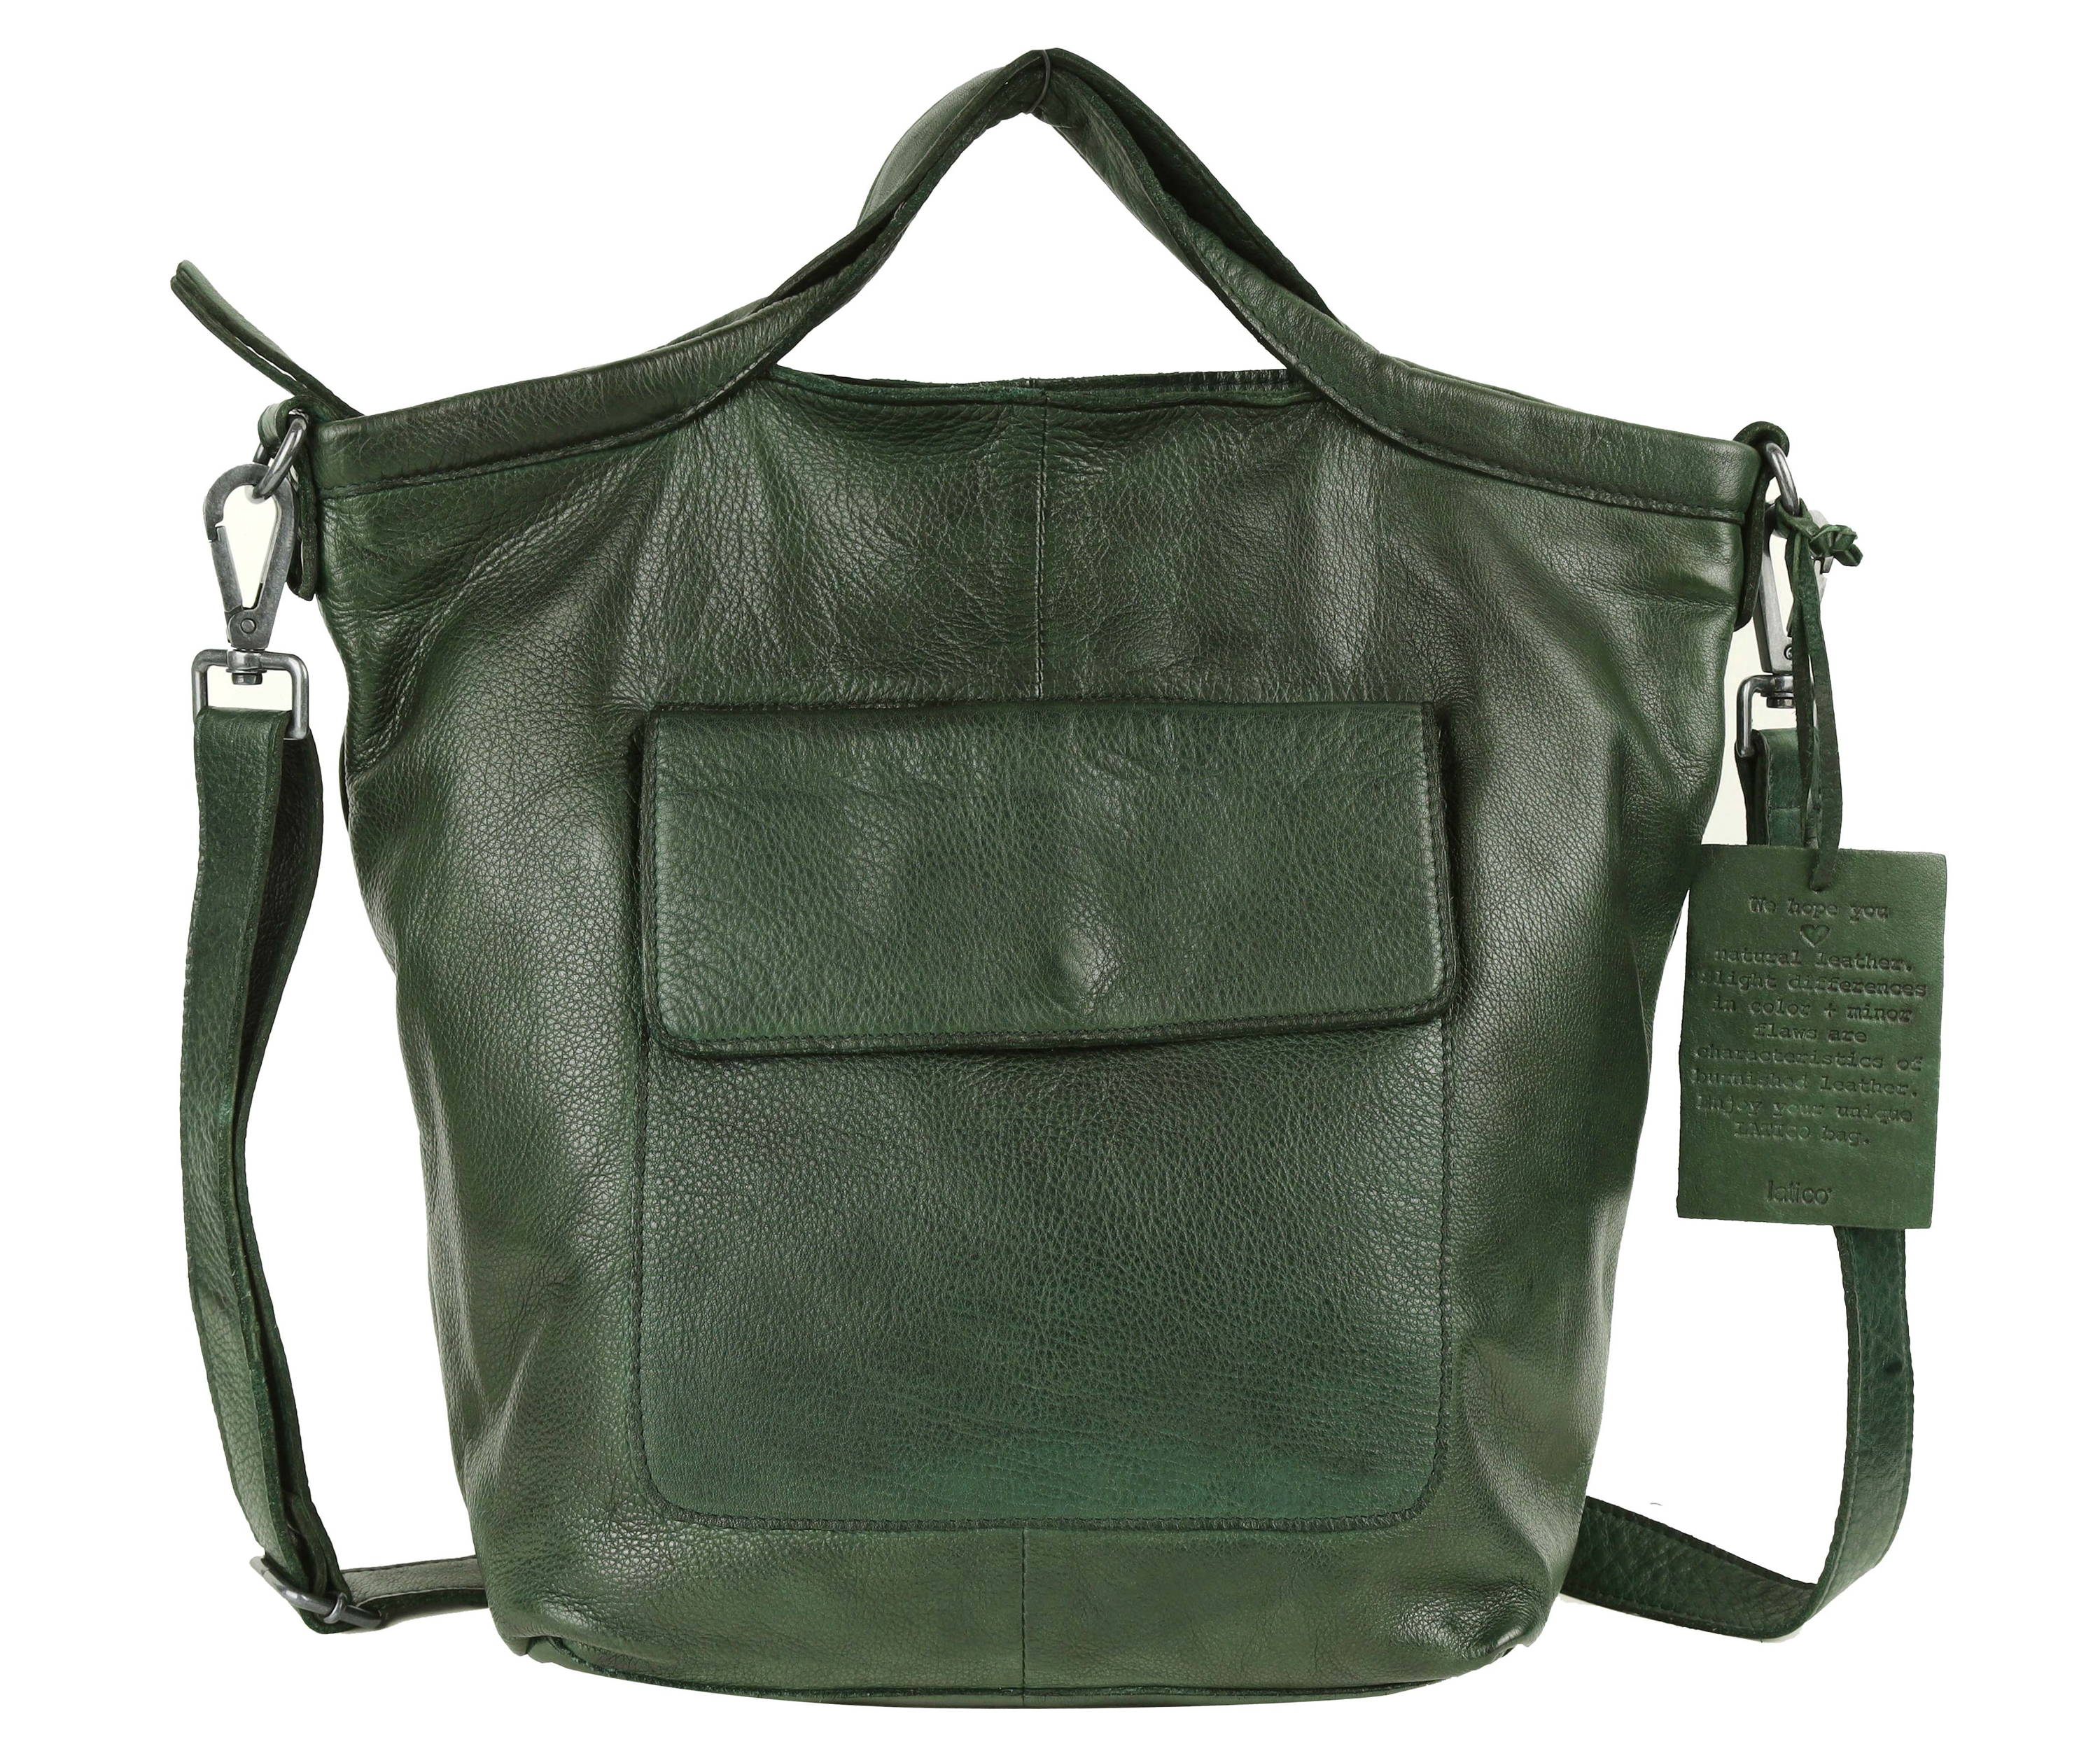 Hunter Colored Bianca Leather Tote Crossbody